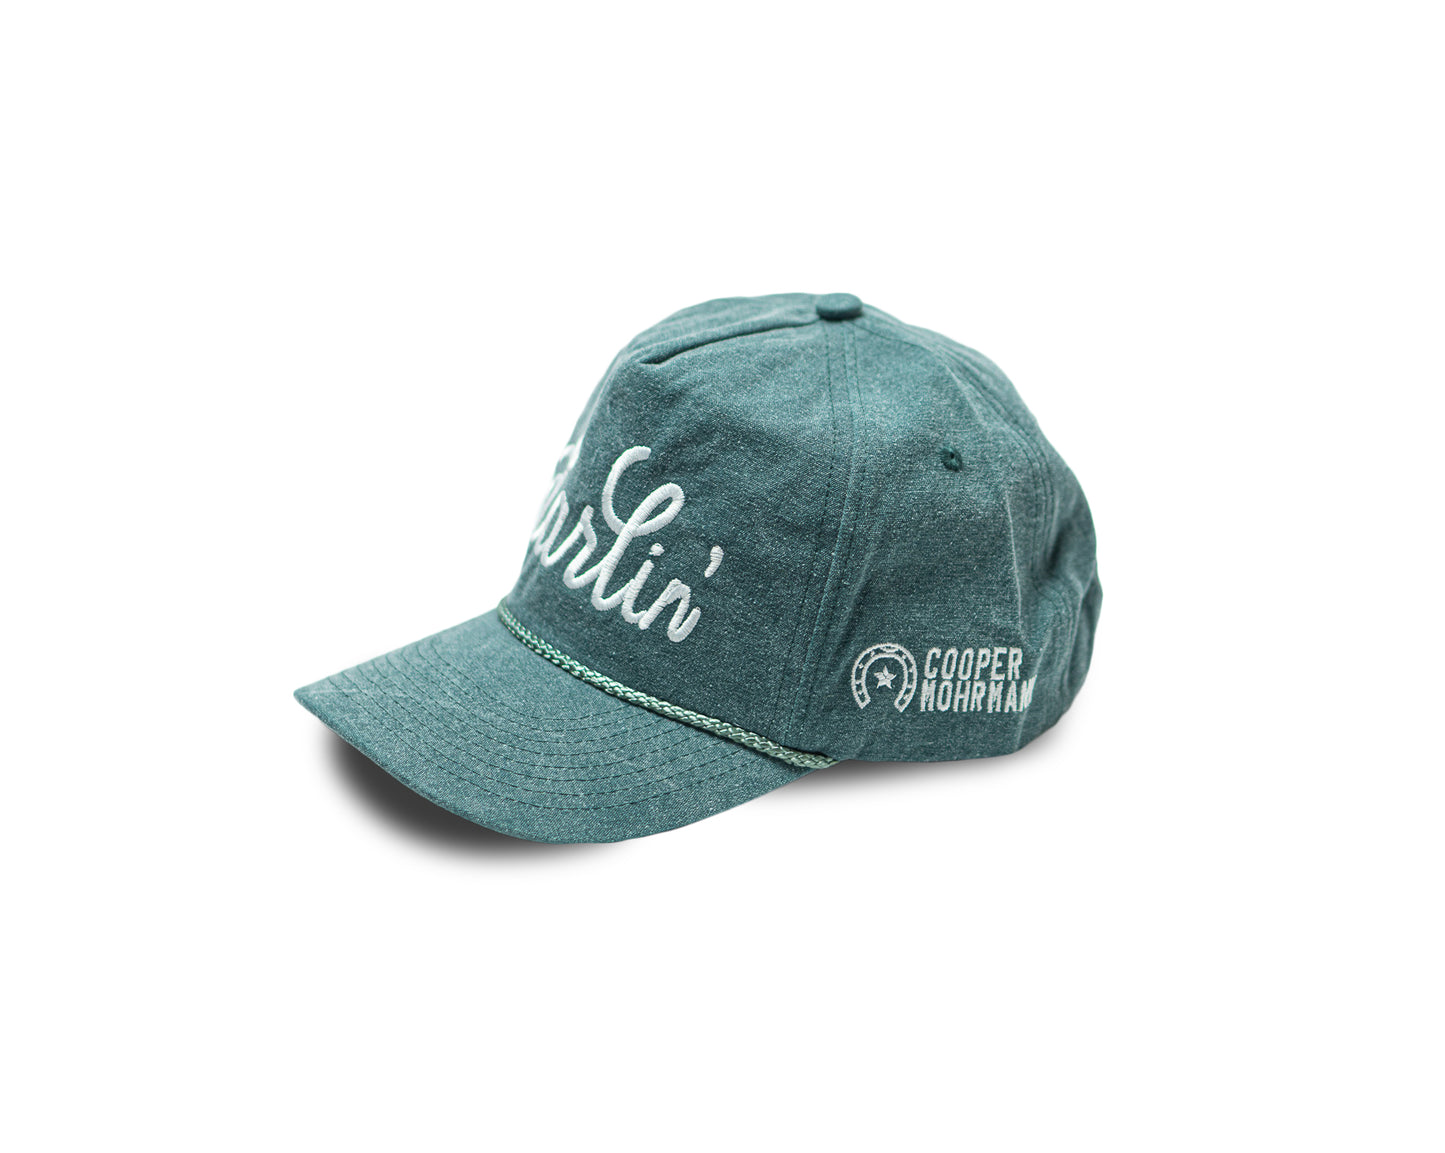 Moss Green and White Darlin’ Hat Stone Washed